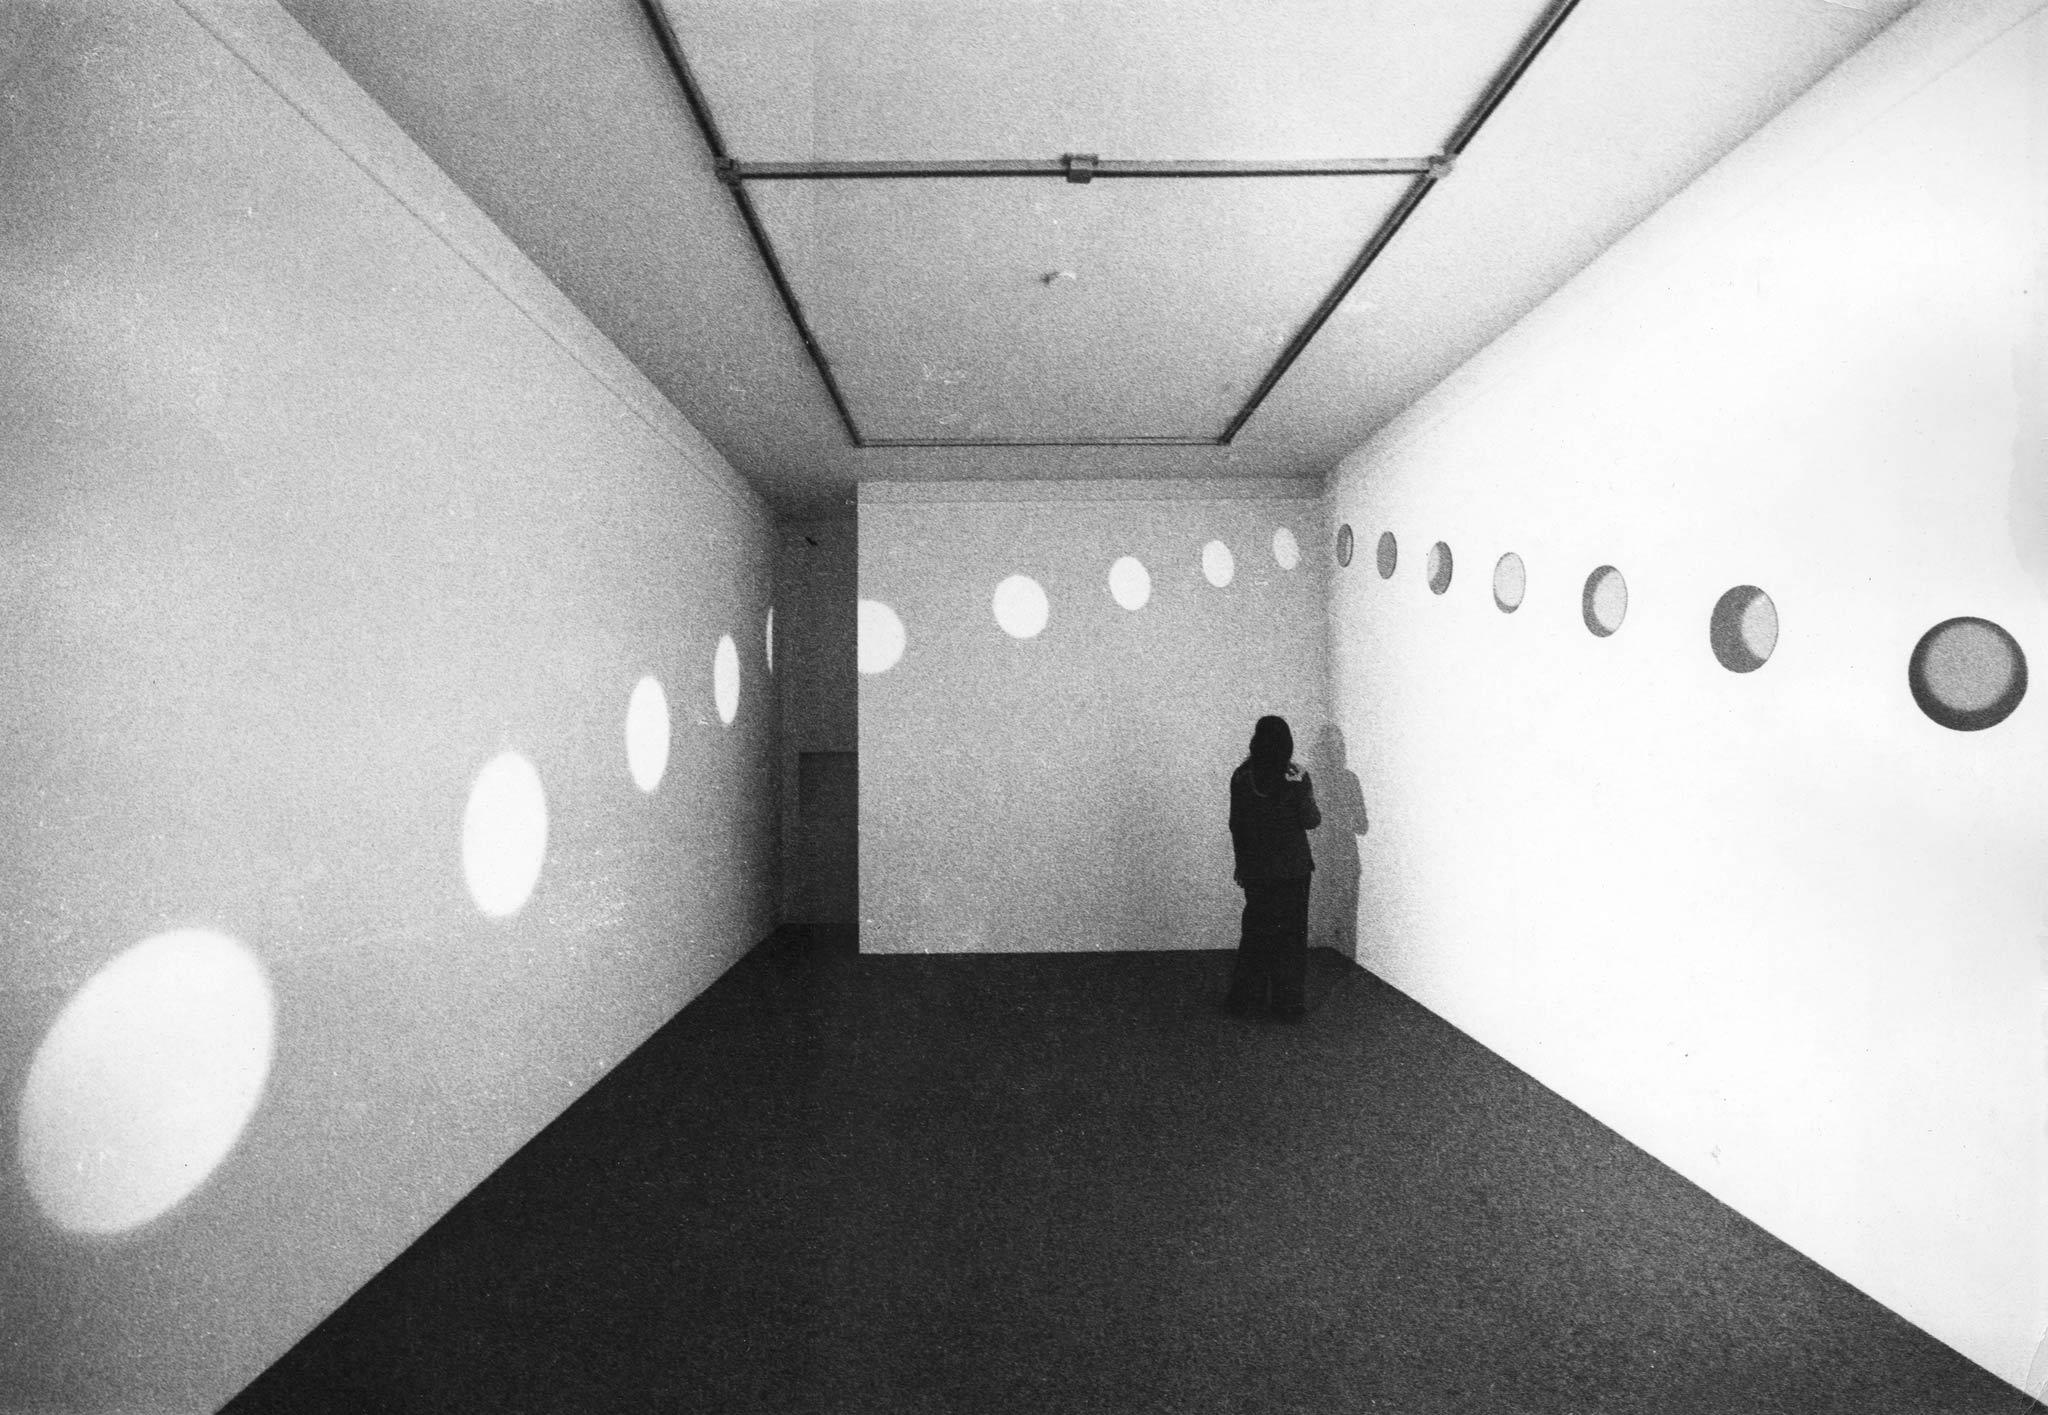 A figure standing in a white walled room. A diagonal line of mirrors in a white walled room. Light is reflecting off the mirrors, creating orbs of light on the other two walls